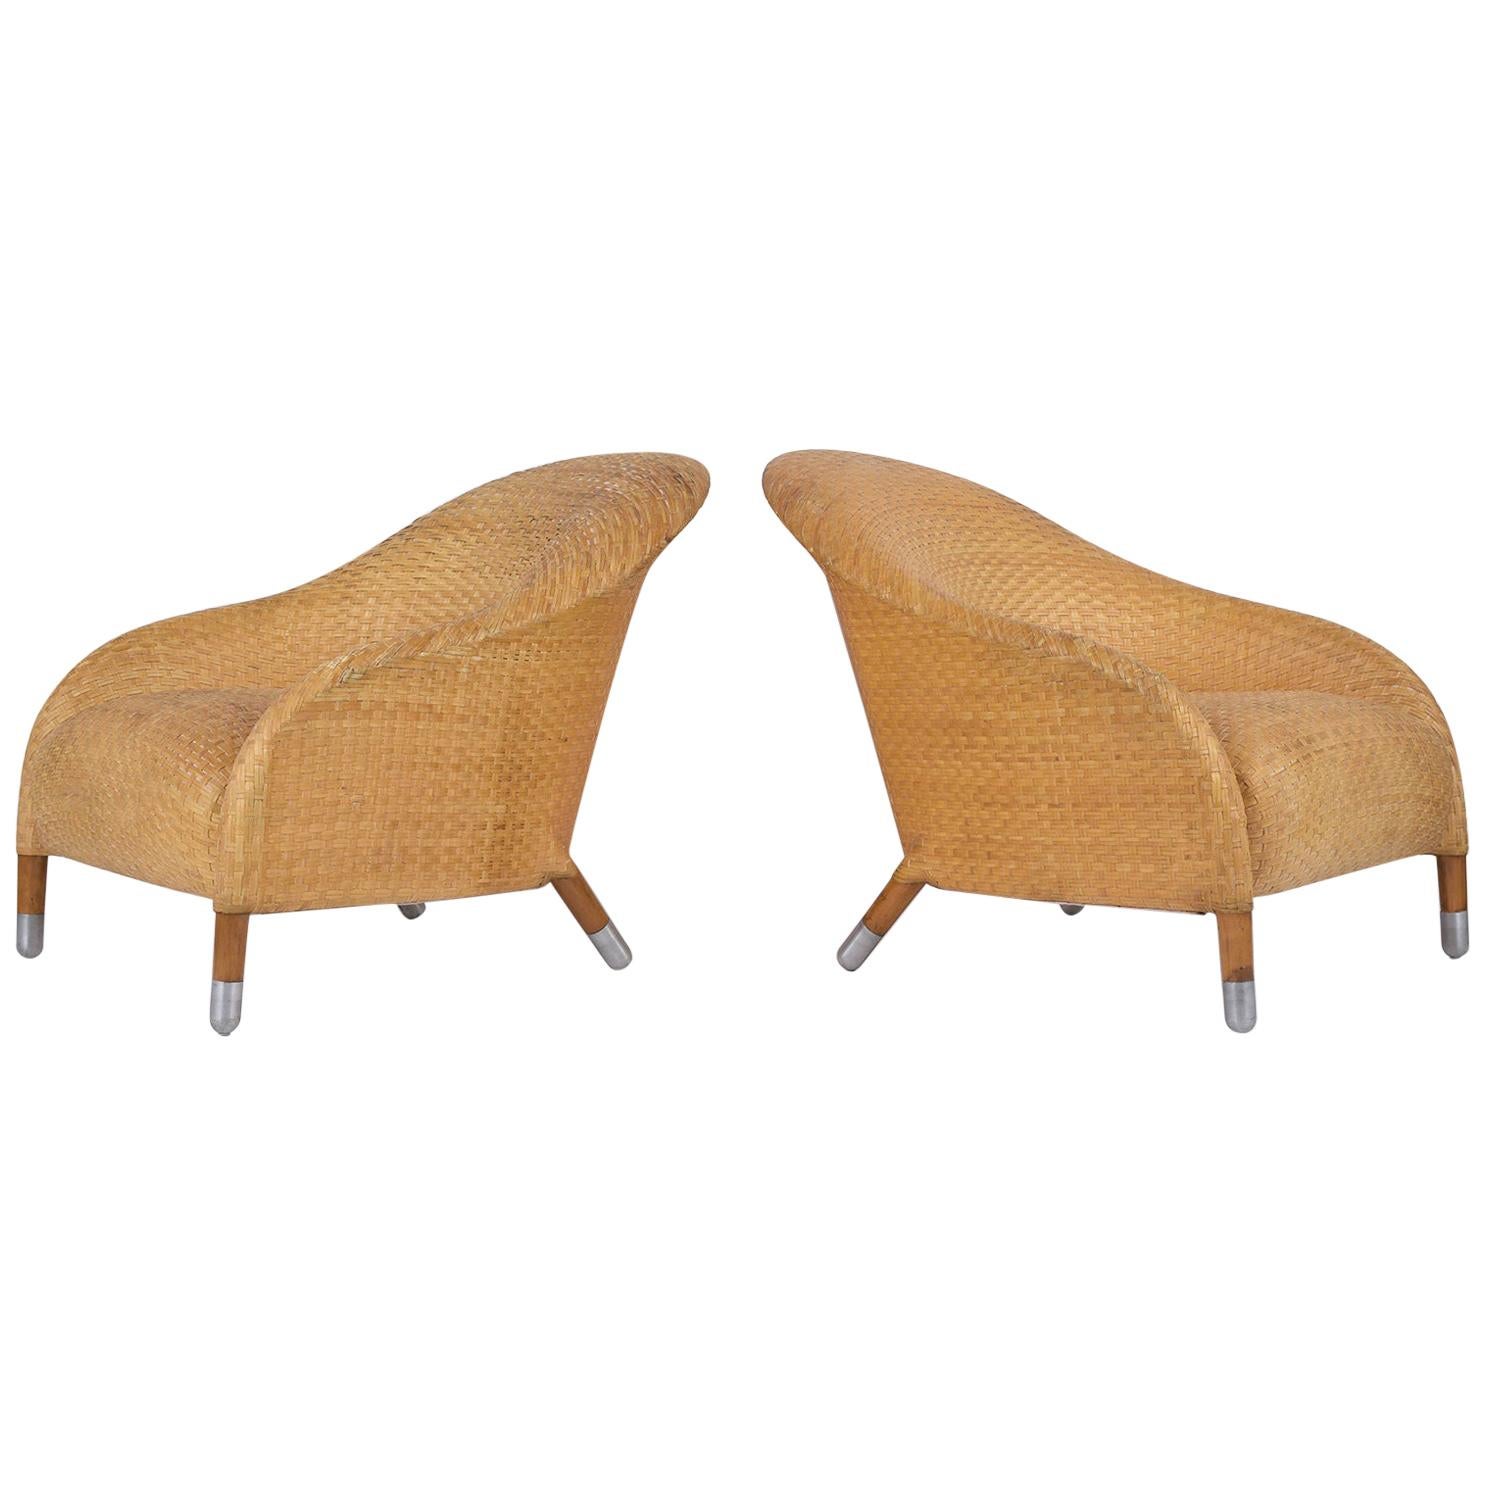 Pair of Woven Leather Chairs